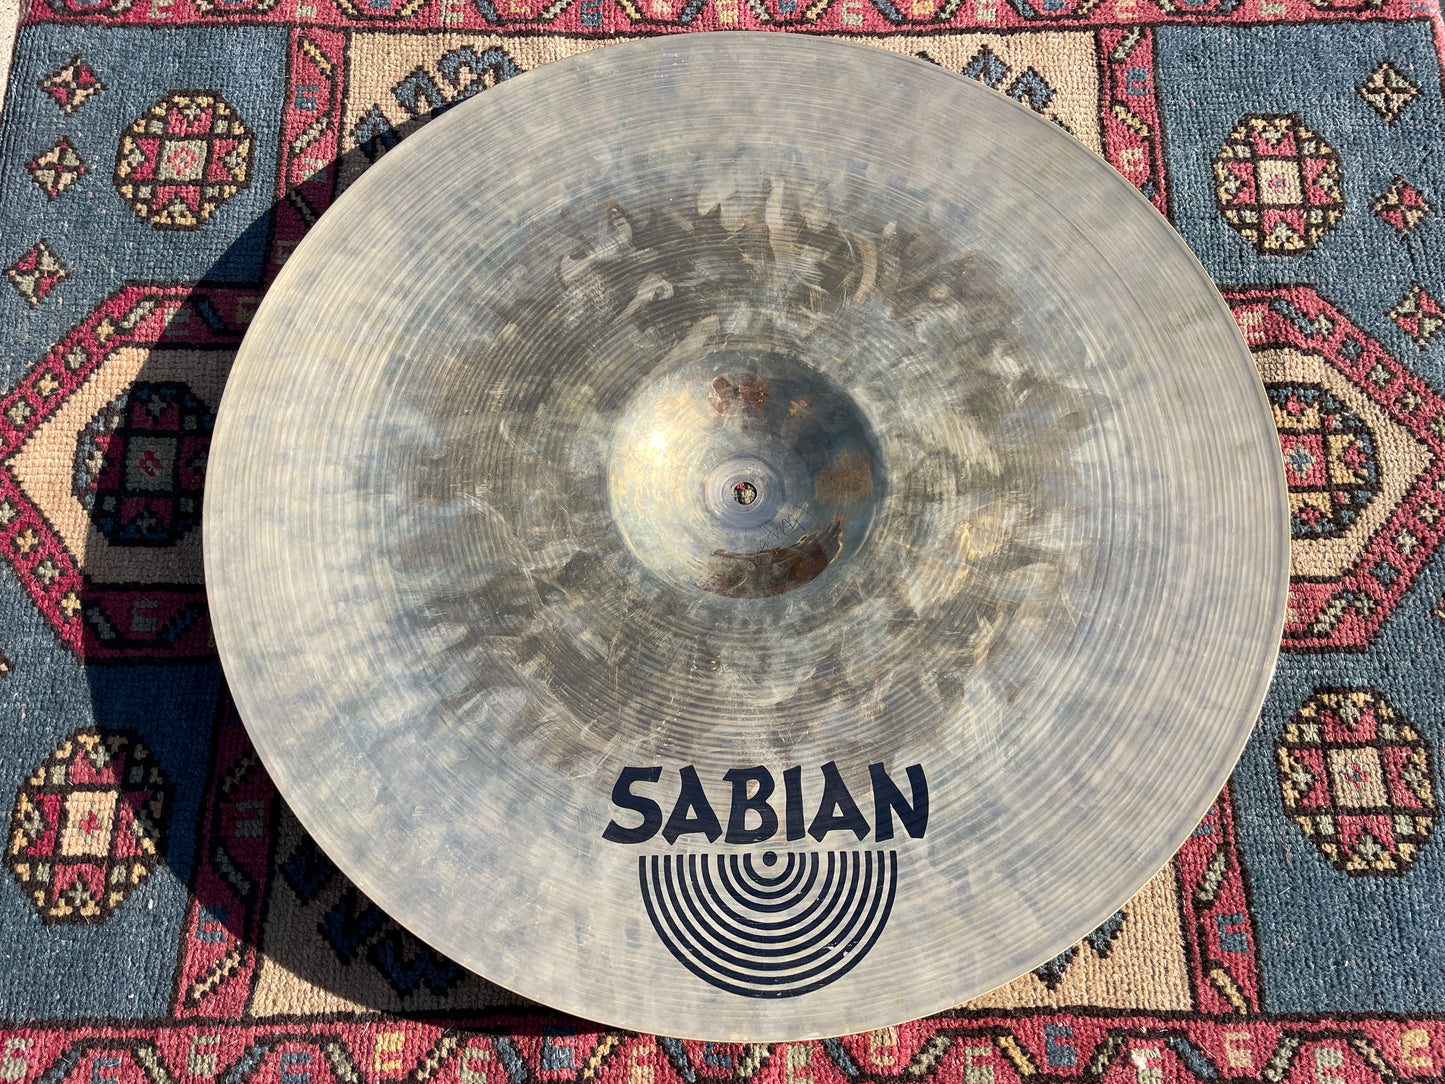 21" Sabian Hand Hammered HH Vintage Ride Cymbal 2220g Brilliant